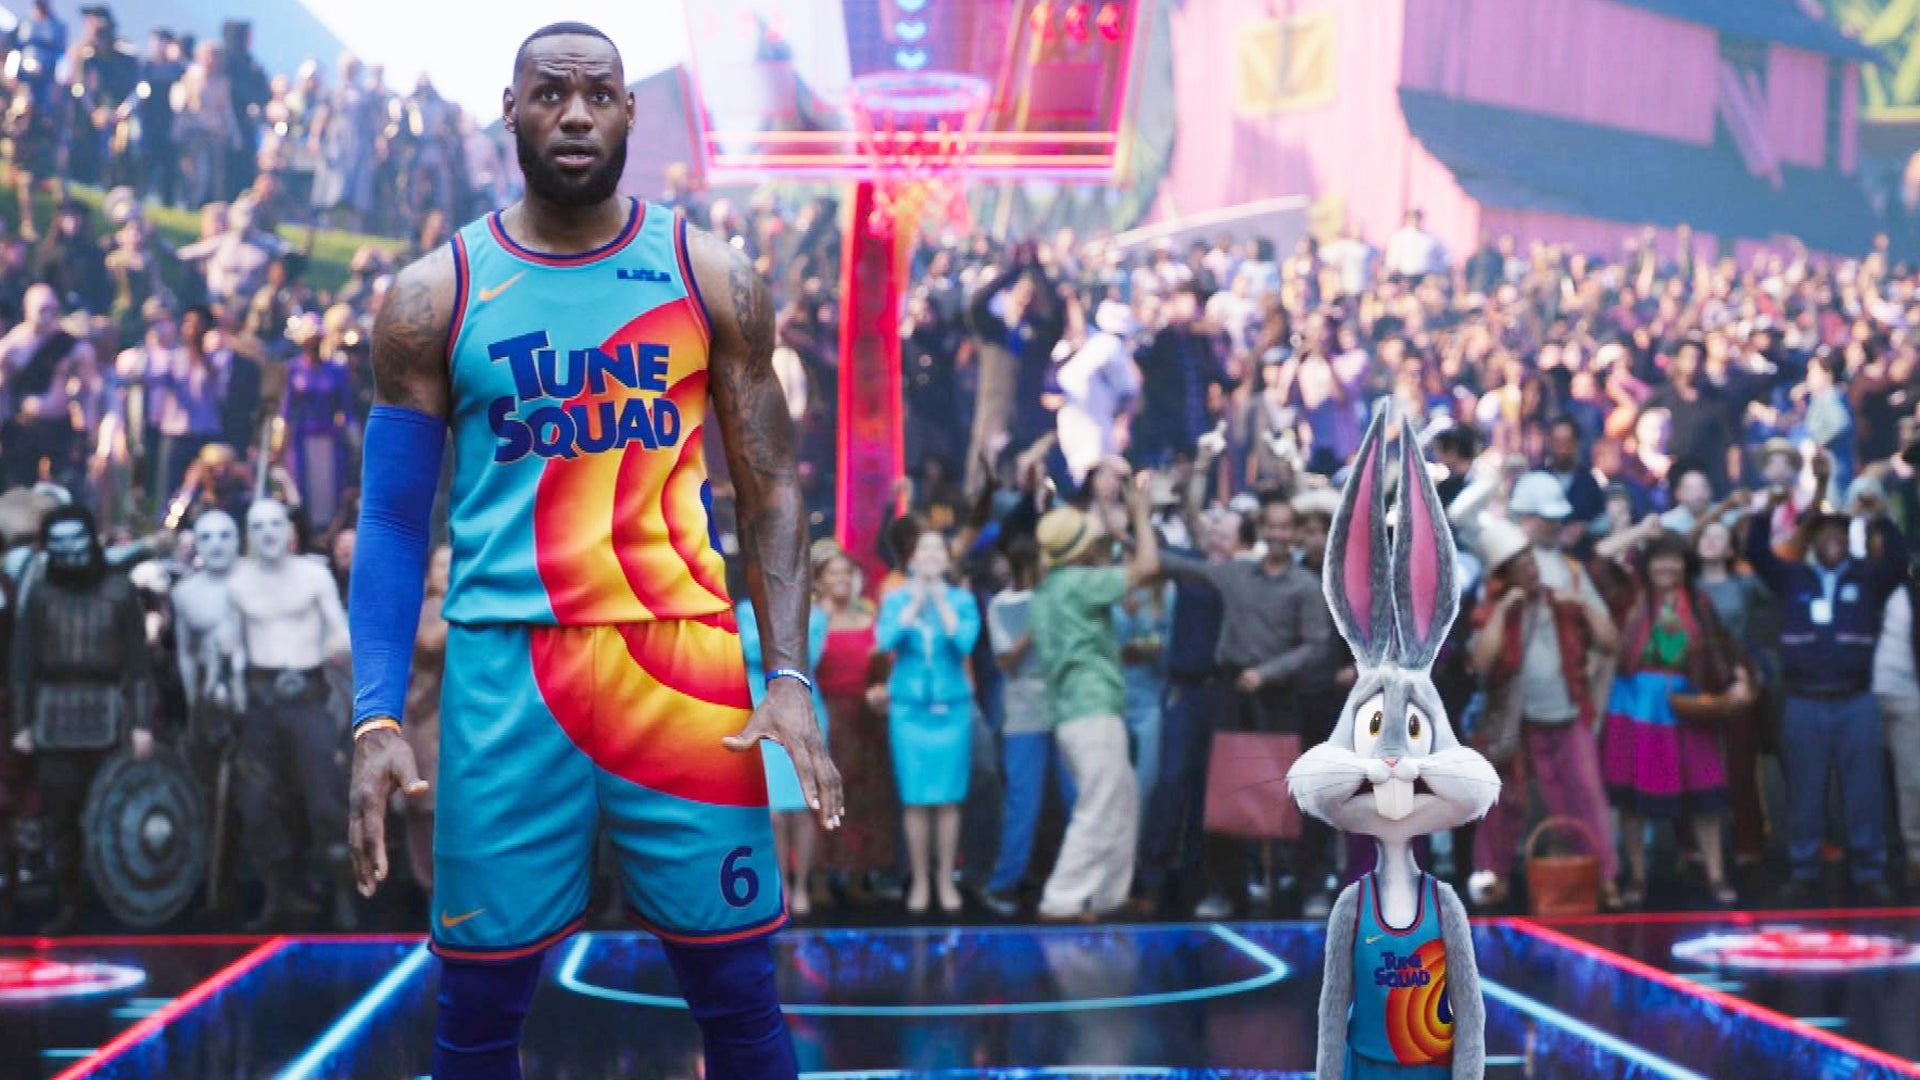 LeBron James reveals Space Jam Tune Squad on Entertainment Weekly